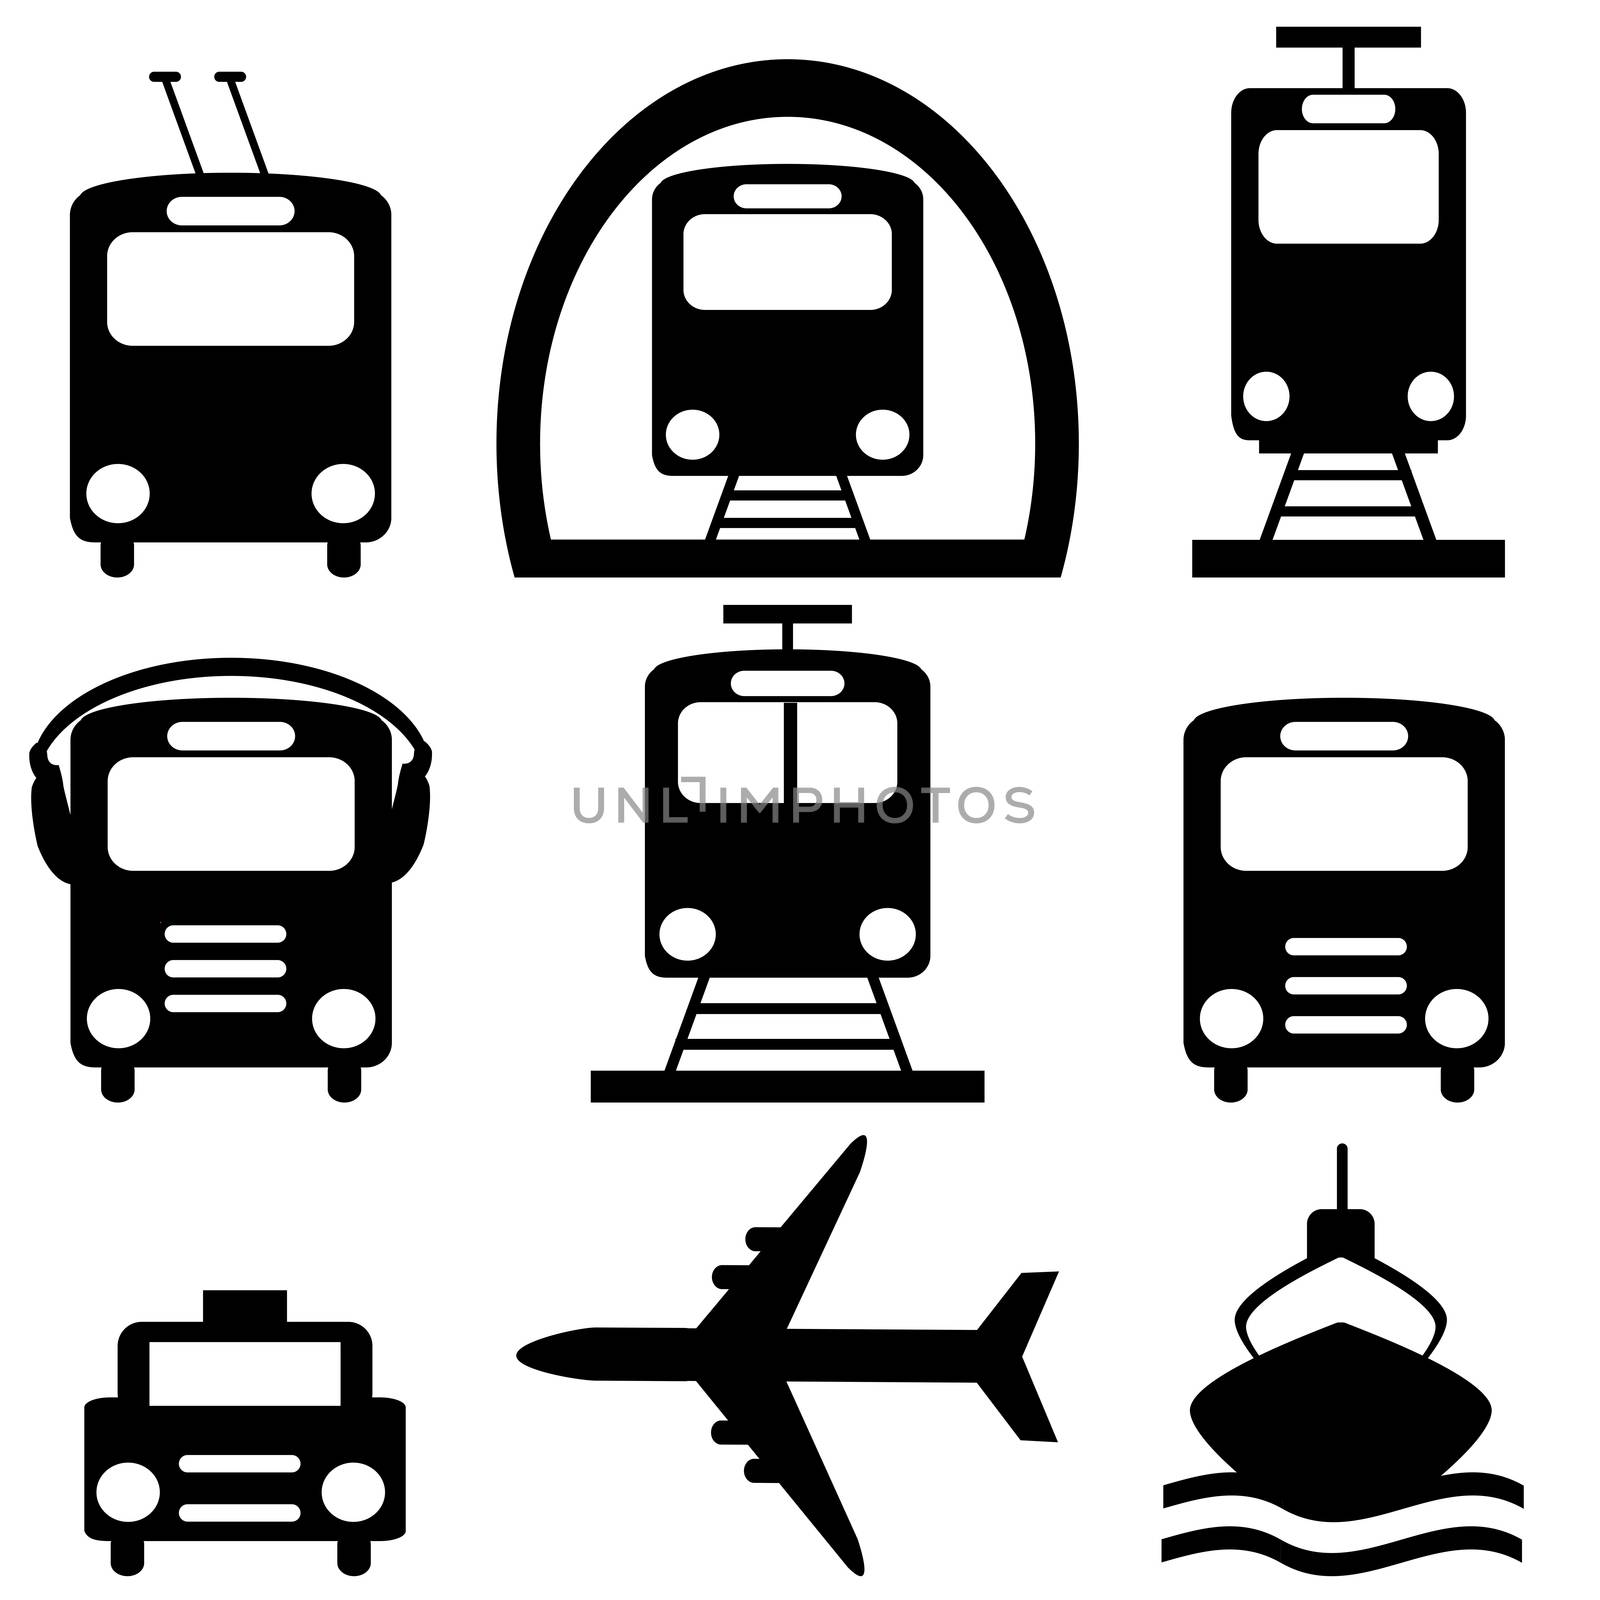 Collection of city transportation pictograms by hibrida13